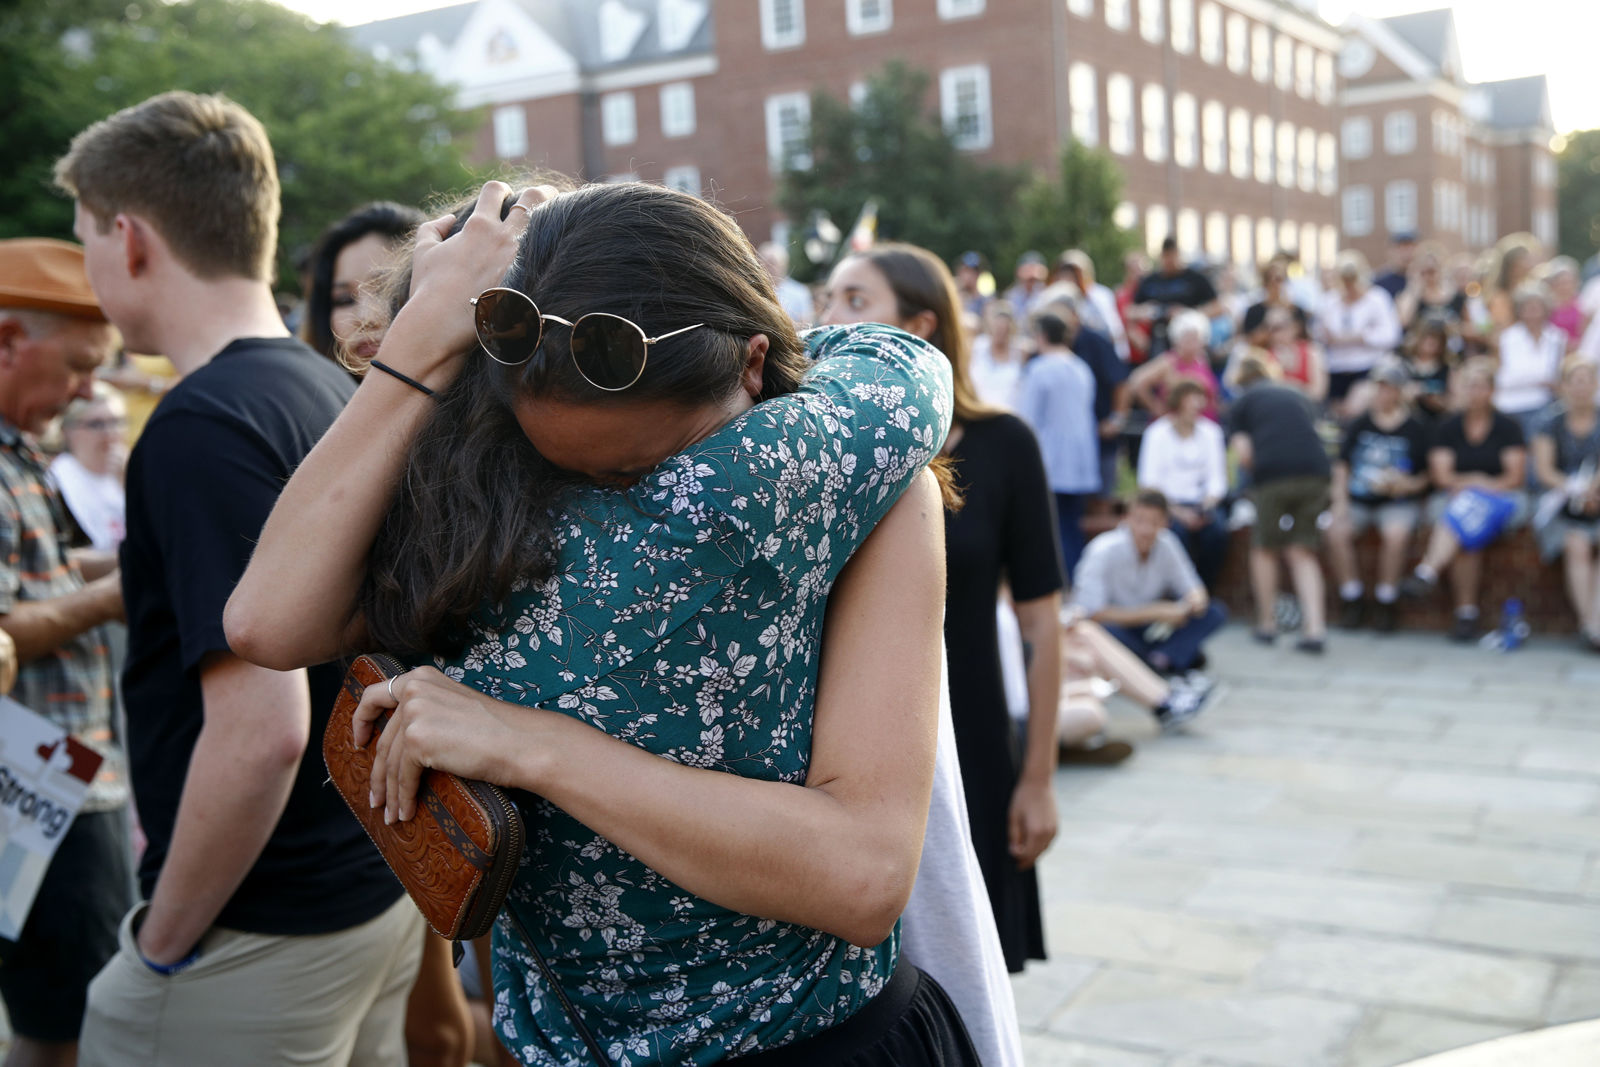 People hug as they gather for a vigil in response to a shooting in the Capital Gazette newsroom, Friday, June 29, 2018, in Annapolis, Md. Prosecutors say Jarrod W. Ramos opened fire Thursday in the newsroom. (AP Photo/Patrick Semansky)